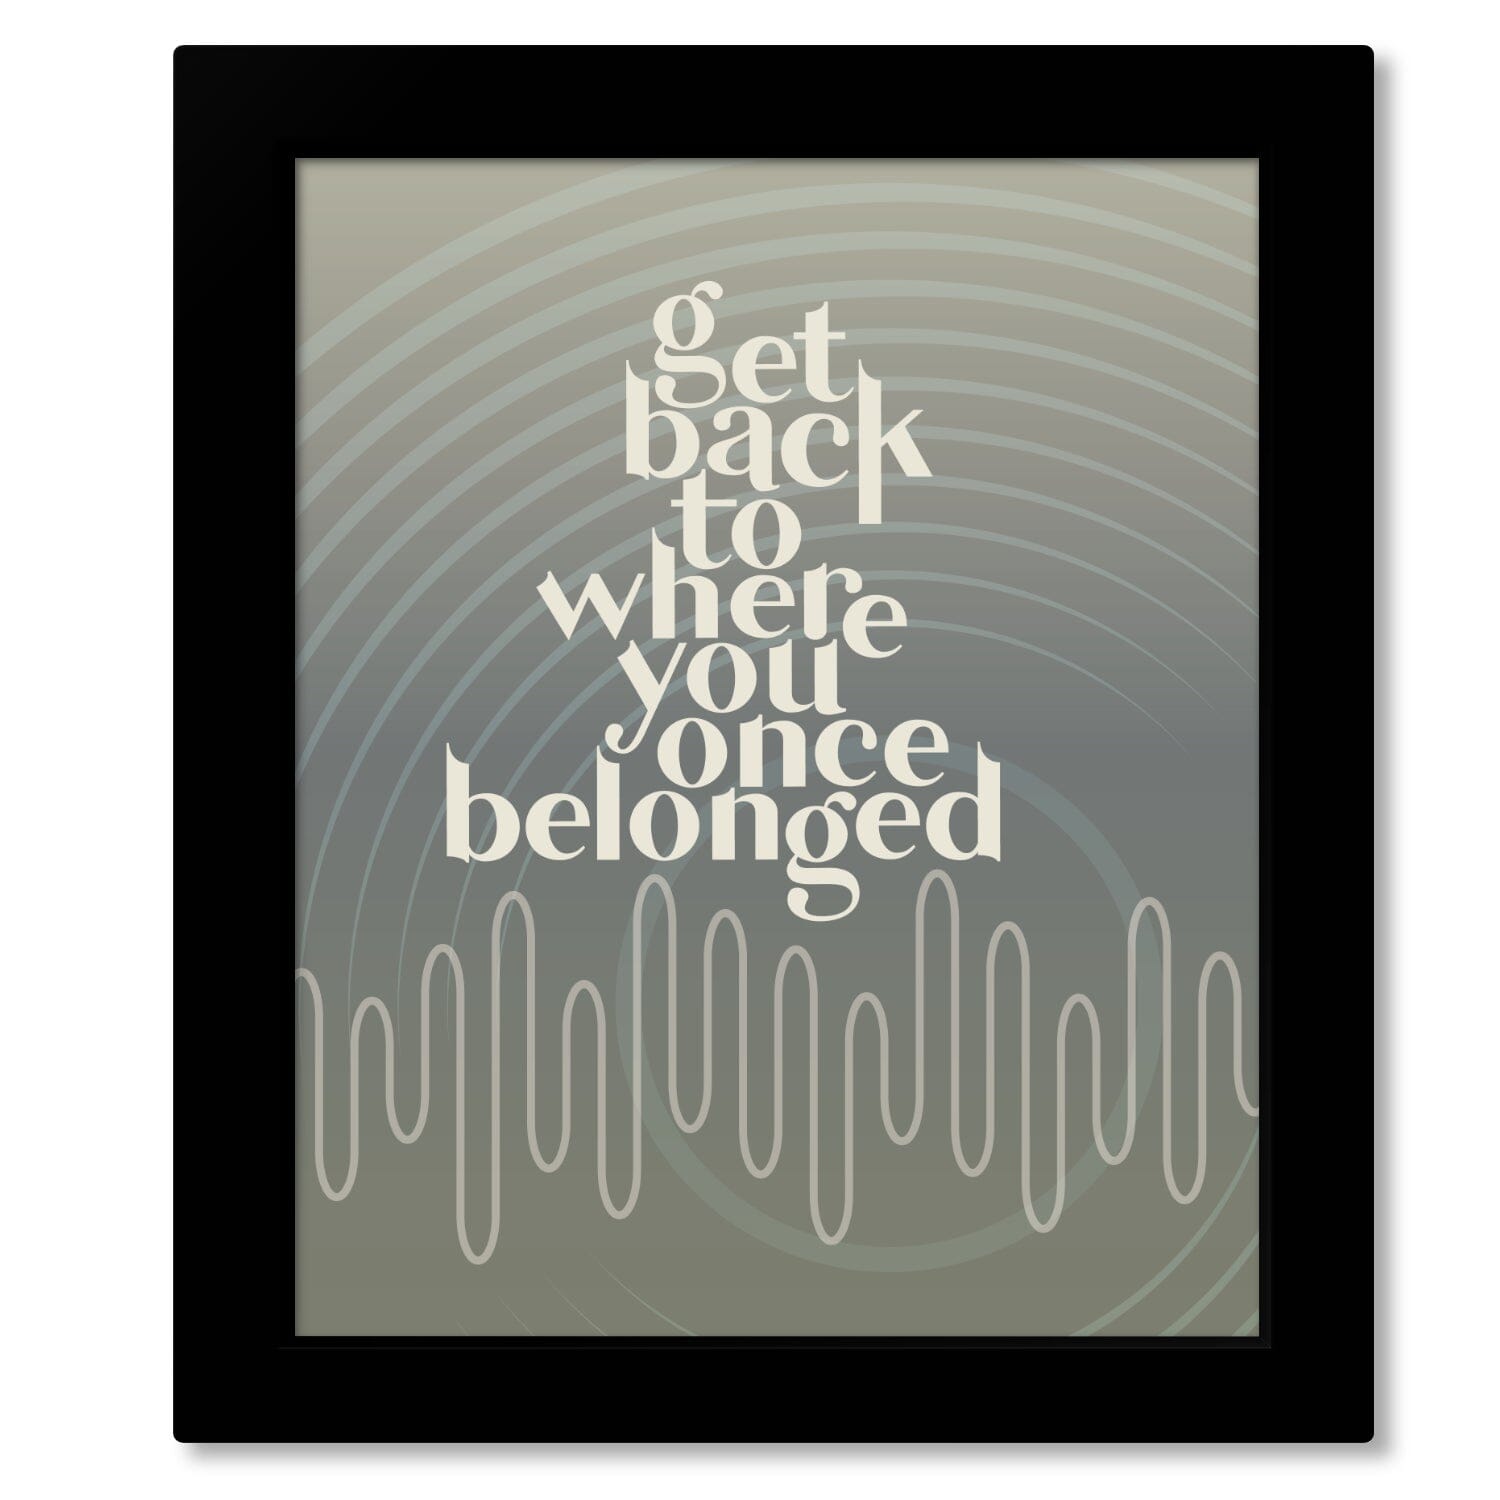 Get Back by the Beatles - Song Lyrics Music Art Print Poster Song Lyrics Art Song Lyrics Art 8x10 Framed Print (without mat) 